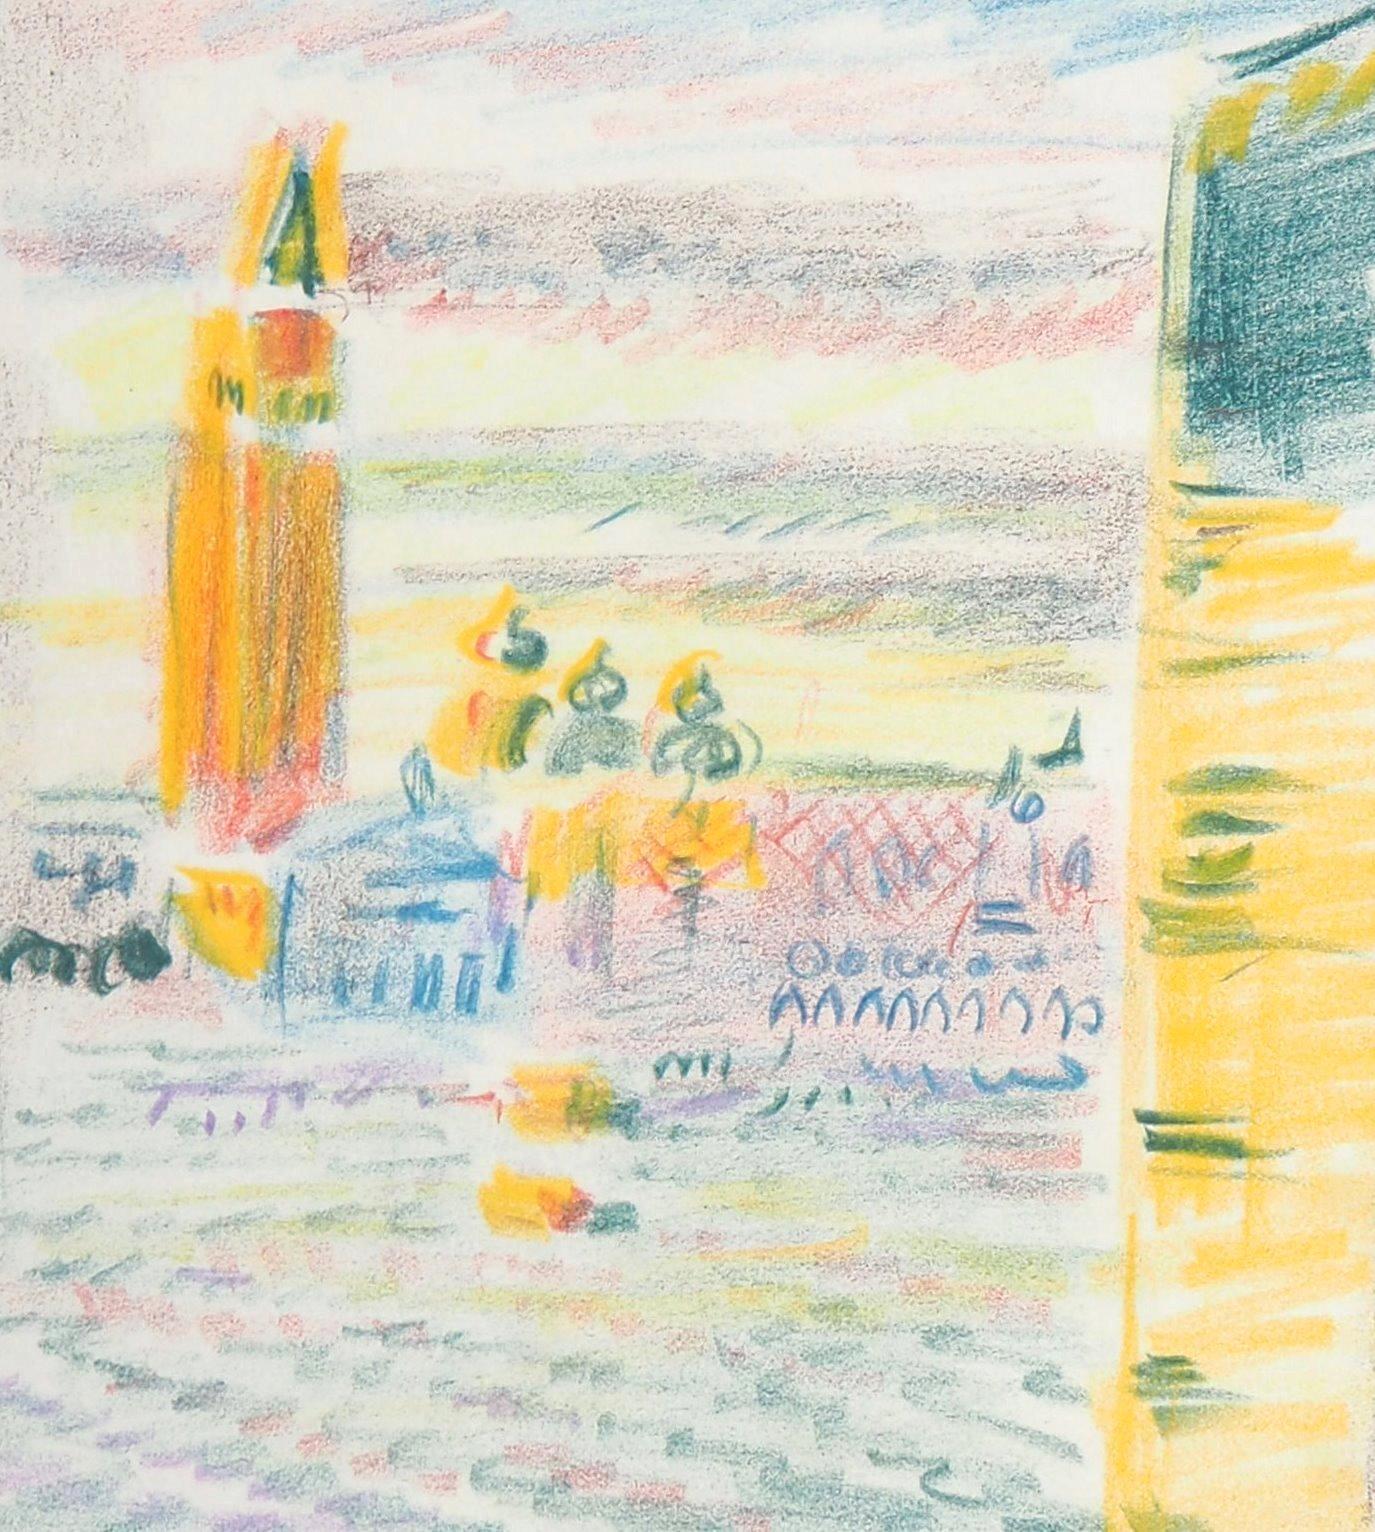 André Masson
Venice in Sunset

Original pastel drawing
Handsigned in pastel with his monogram
On paper, 39 x 33,5 cm (c. 15,3 x 13,1 inch)

Ausgezeichneter Zustand